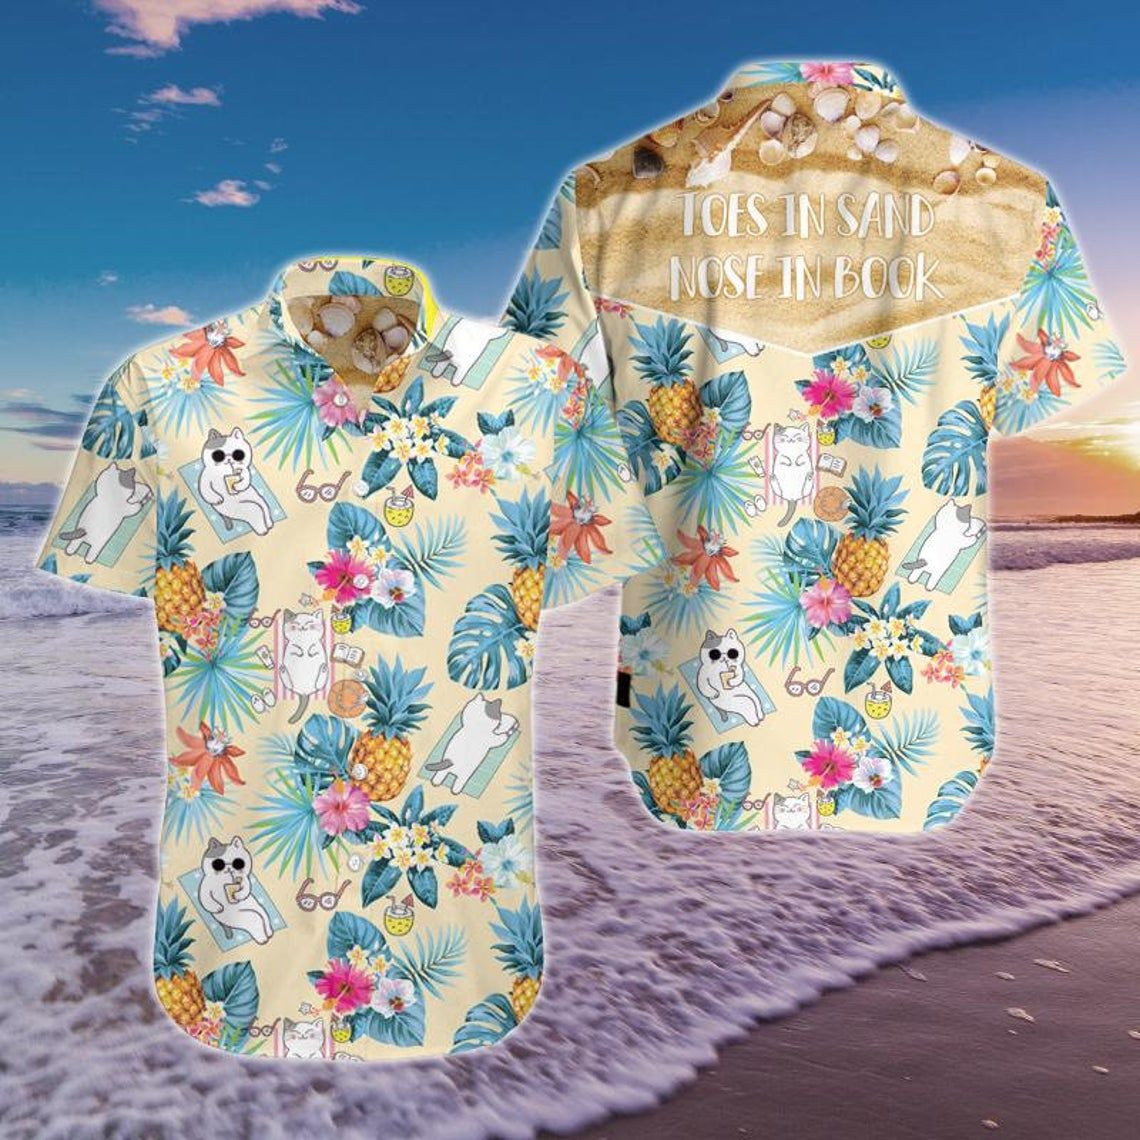 NEW Toes in Sand Nose in Book Cat Short Sleeve Hawaii Shirt2